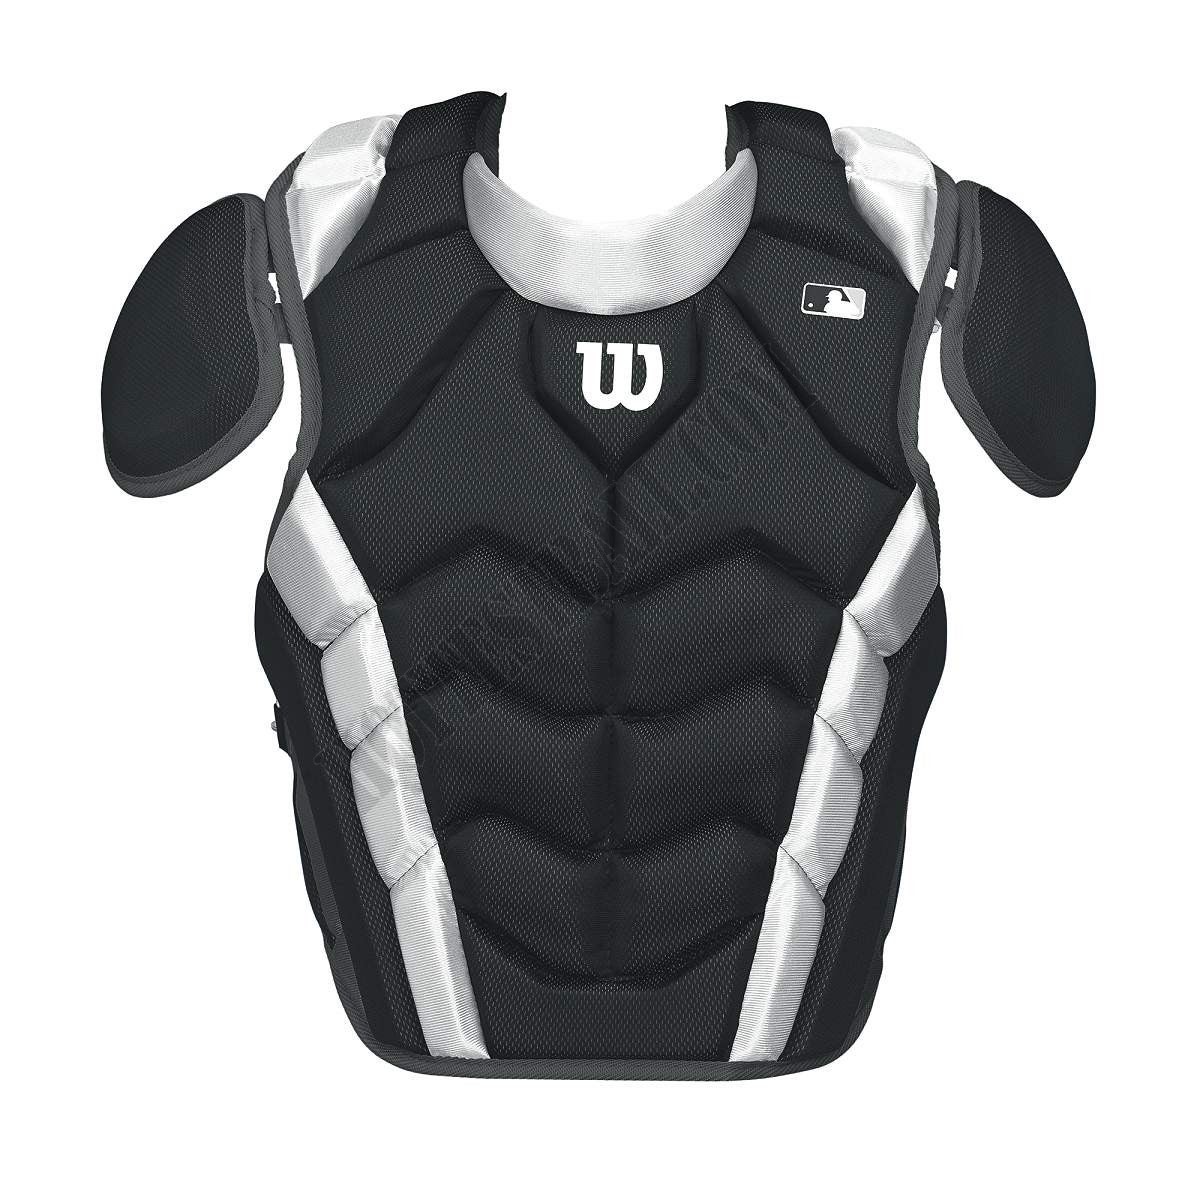 Pro Stock Chest Protector - Wilson Discount Store - -1